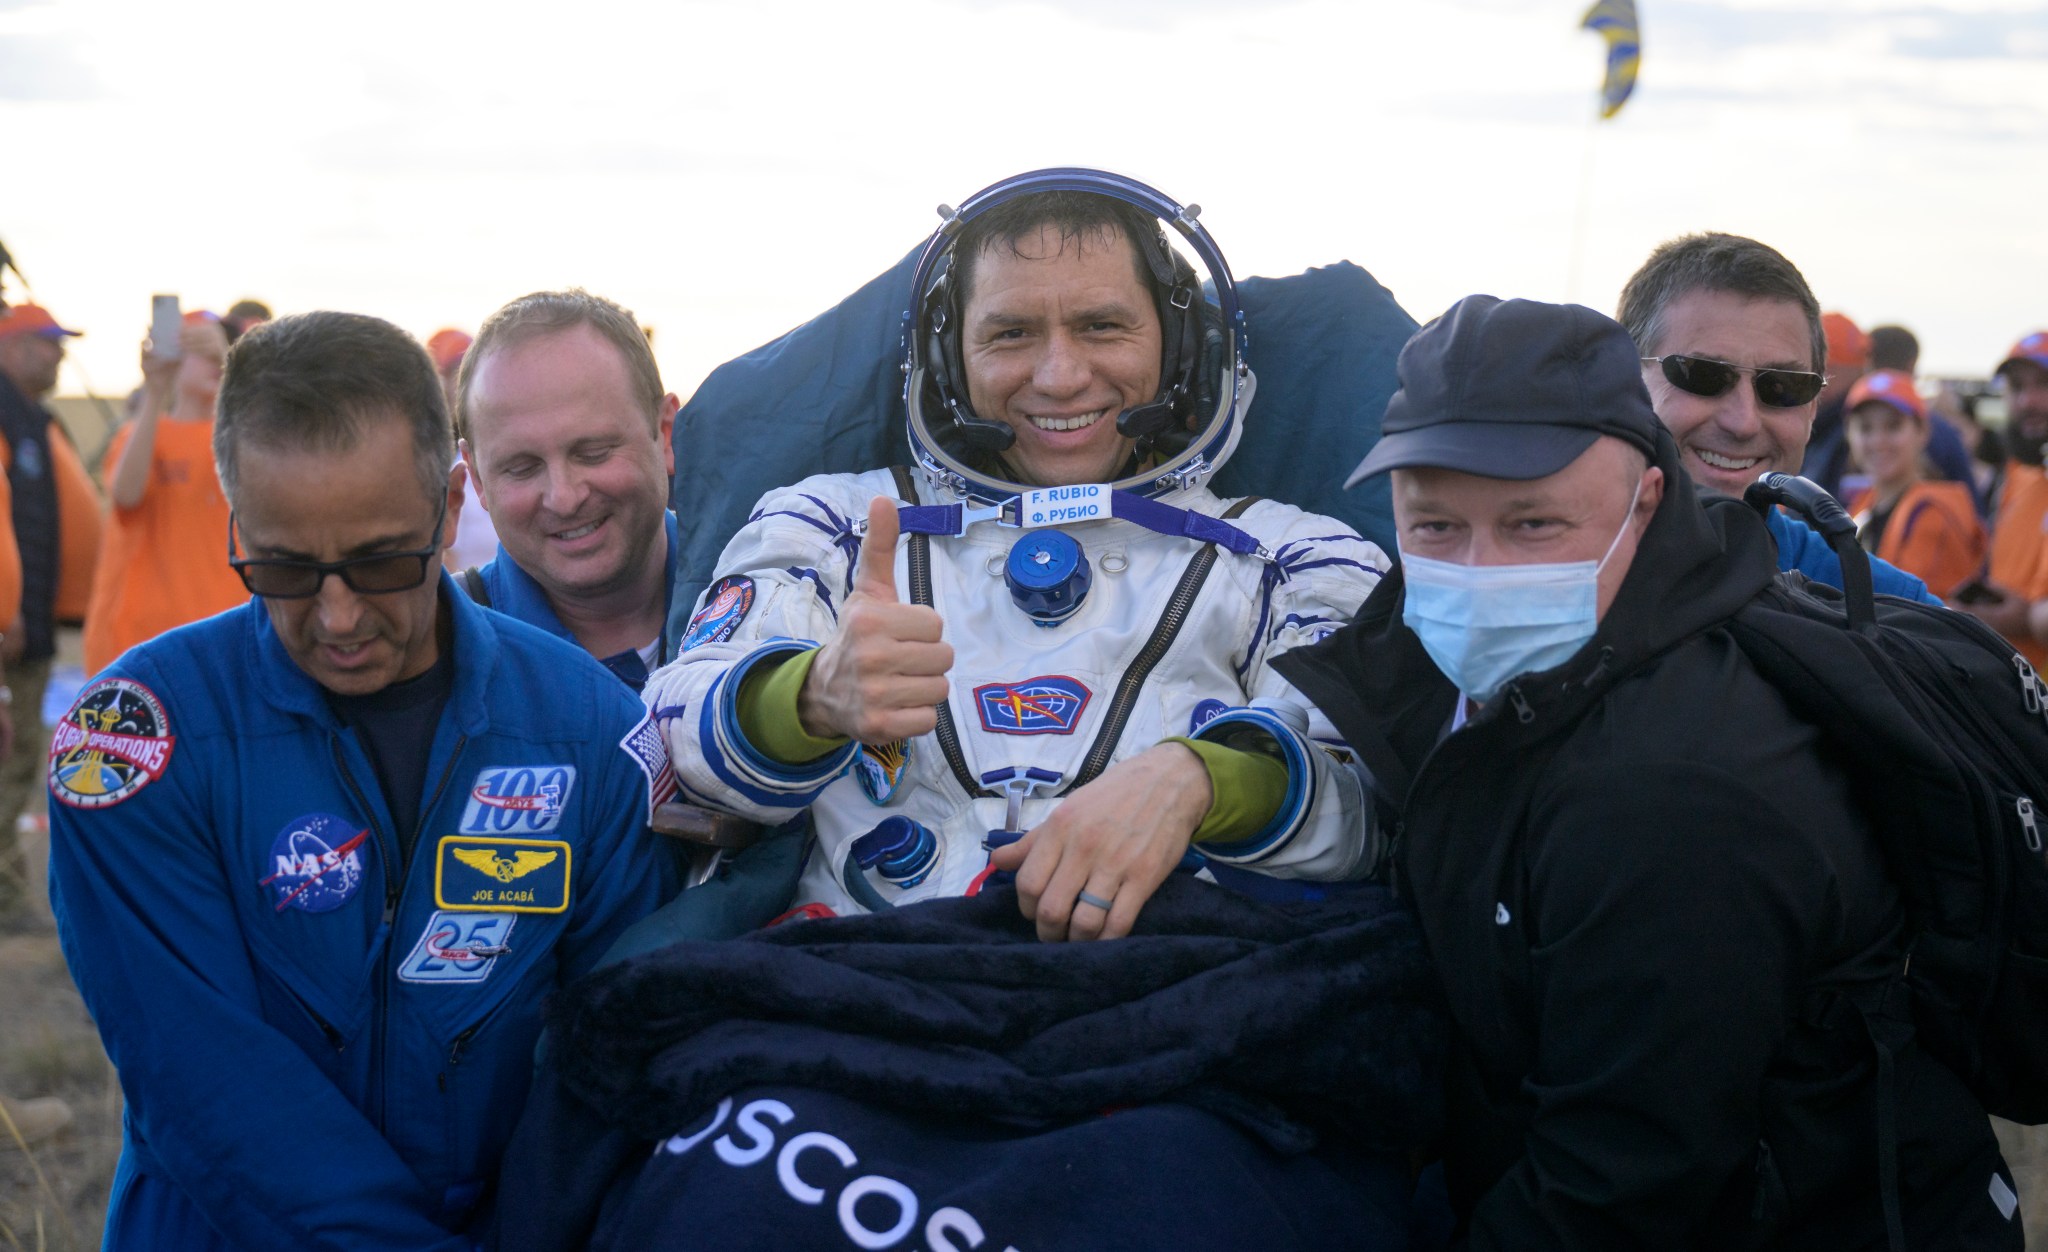 Astronaut Frank Rubio gives the camera a thumbs up as he is carried by four men, including NASA astronaut Joe Acaba (front left). Rubio wears a white spacesuit with blue accents and several mission patches. He rests against the propped-up top portion of a stretcher and has a dark blue blanket on his lap.